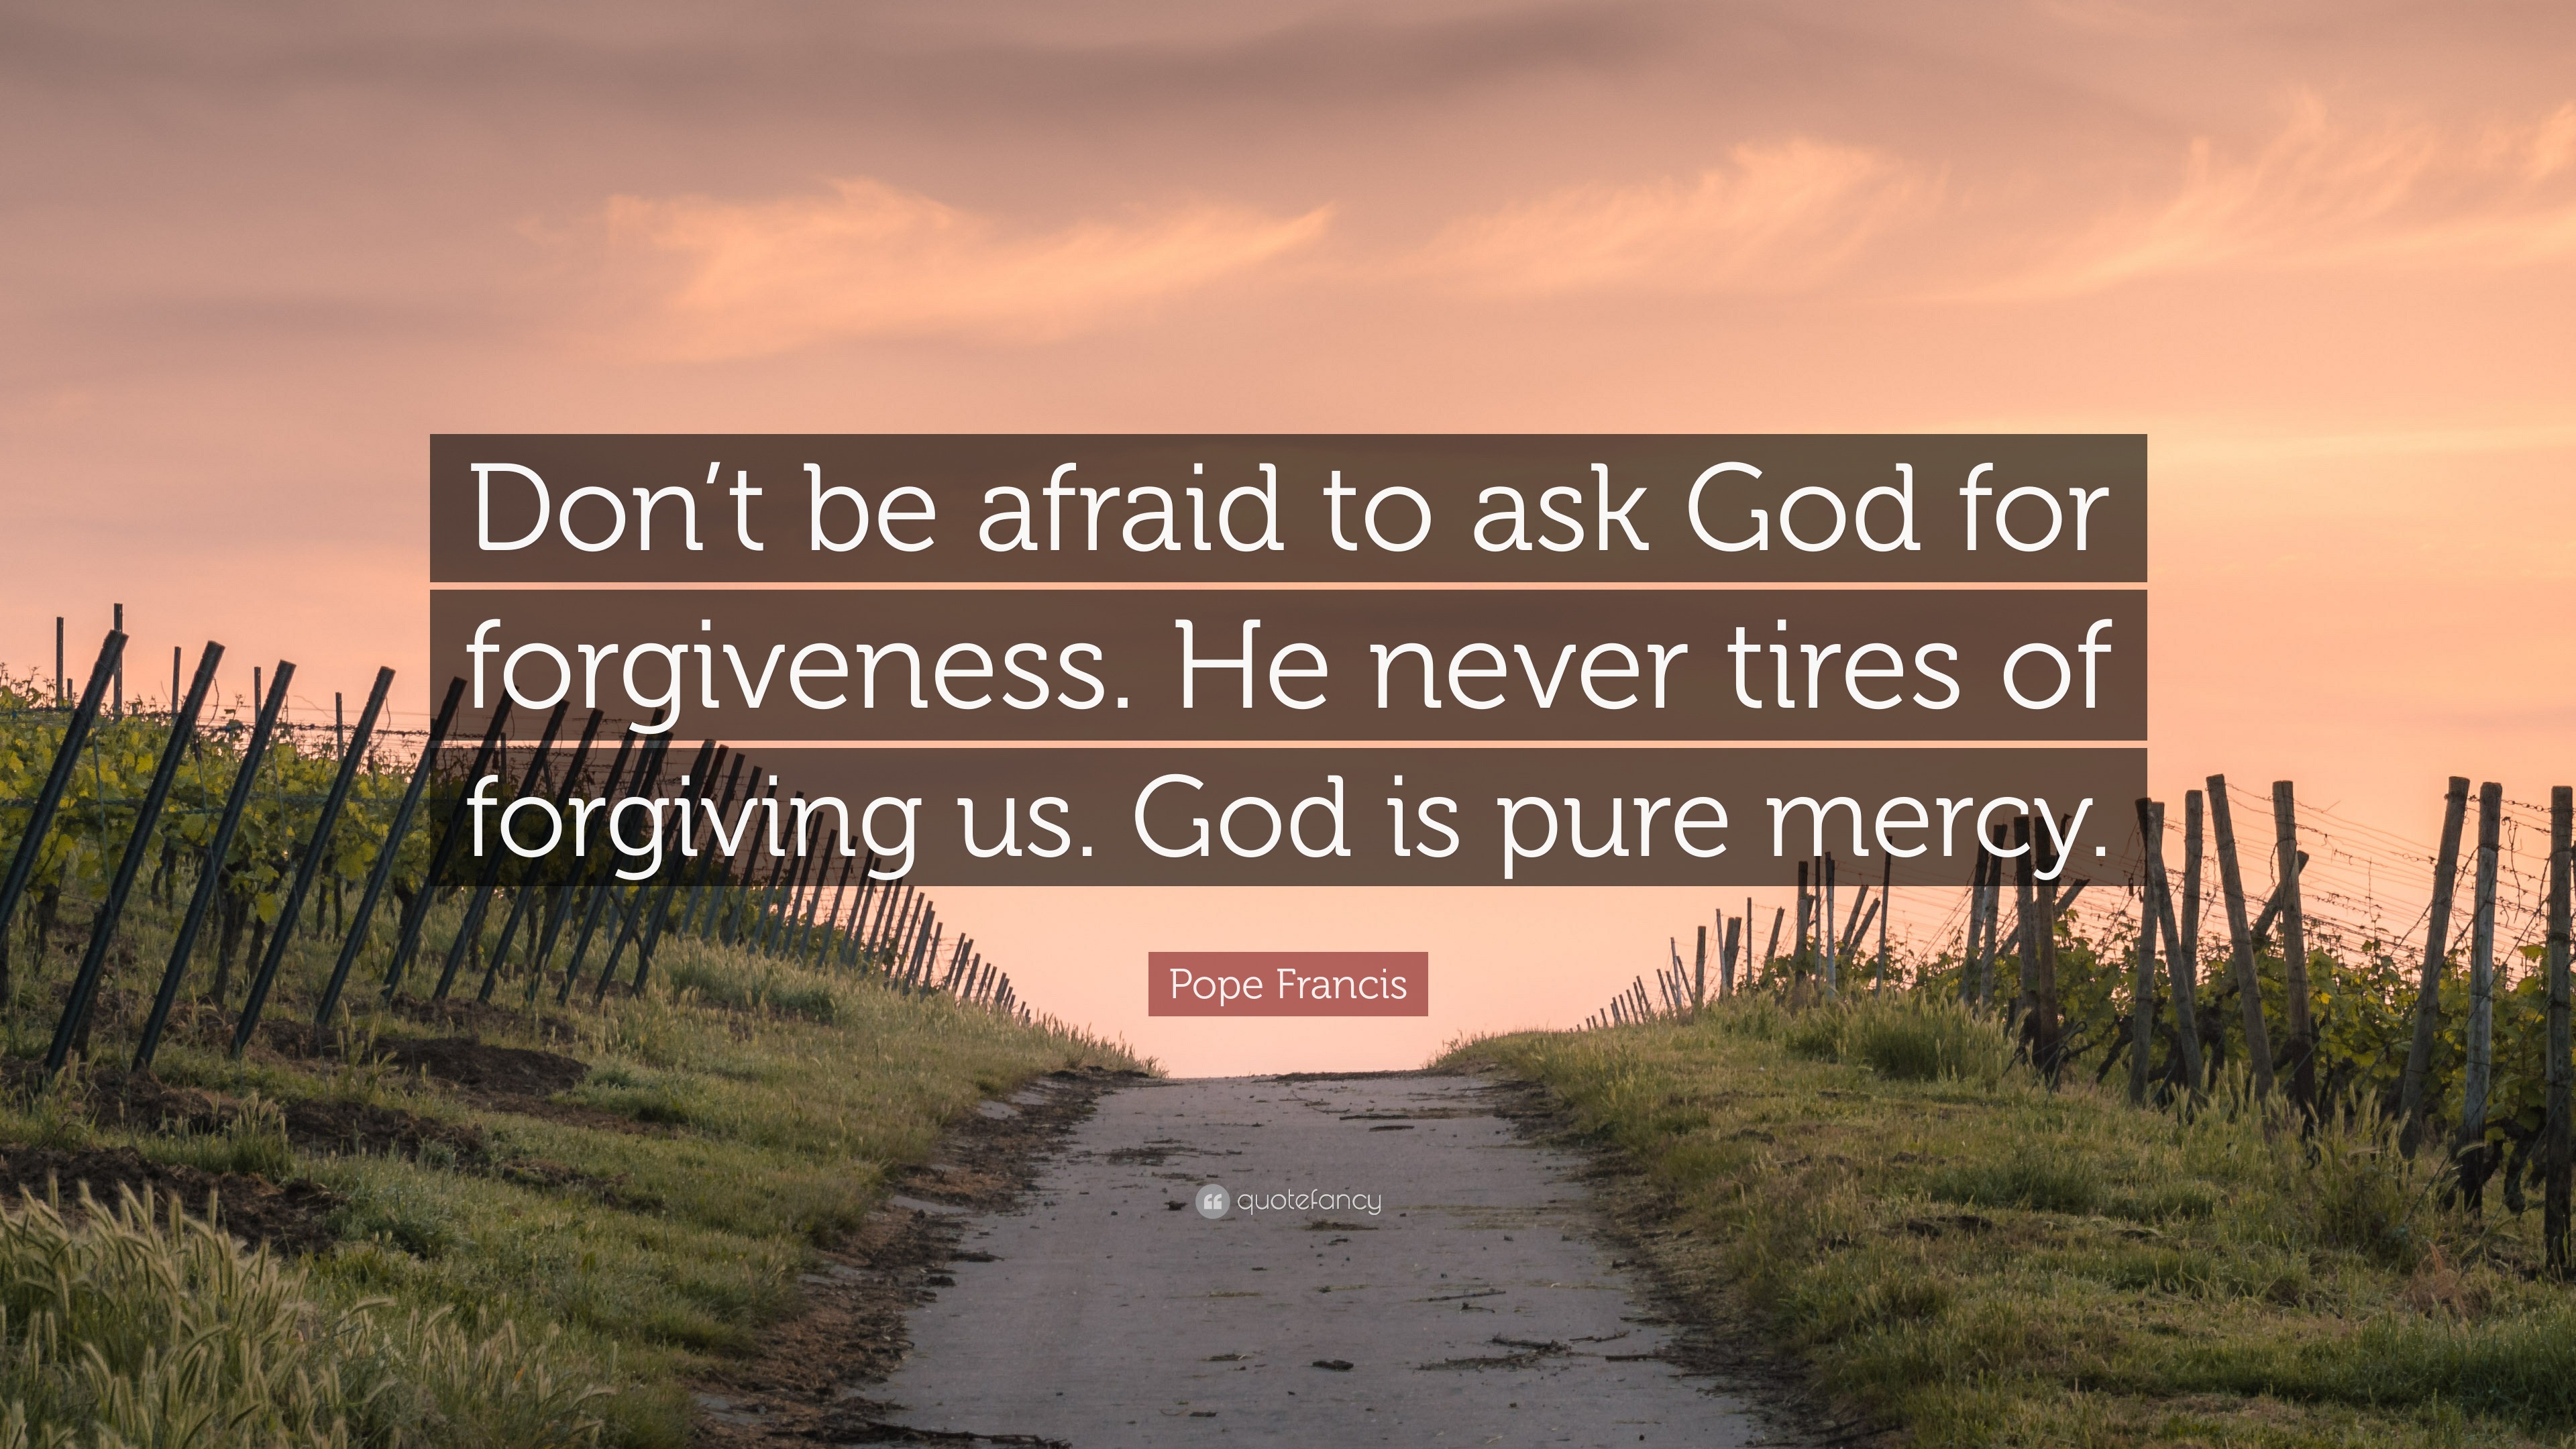 Pope Francis Quote “Don’t be afraid to ask God for